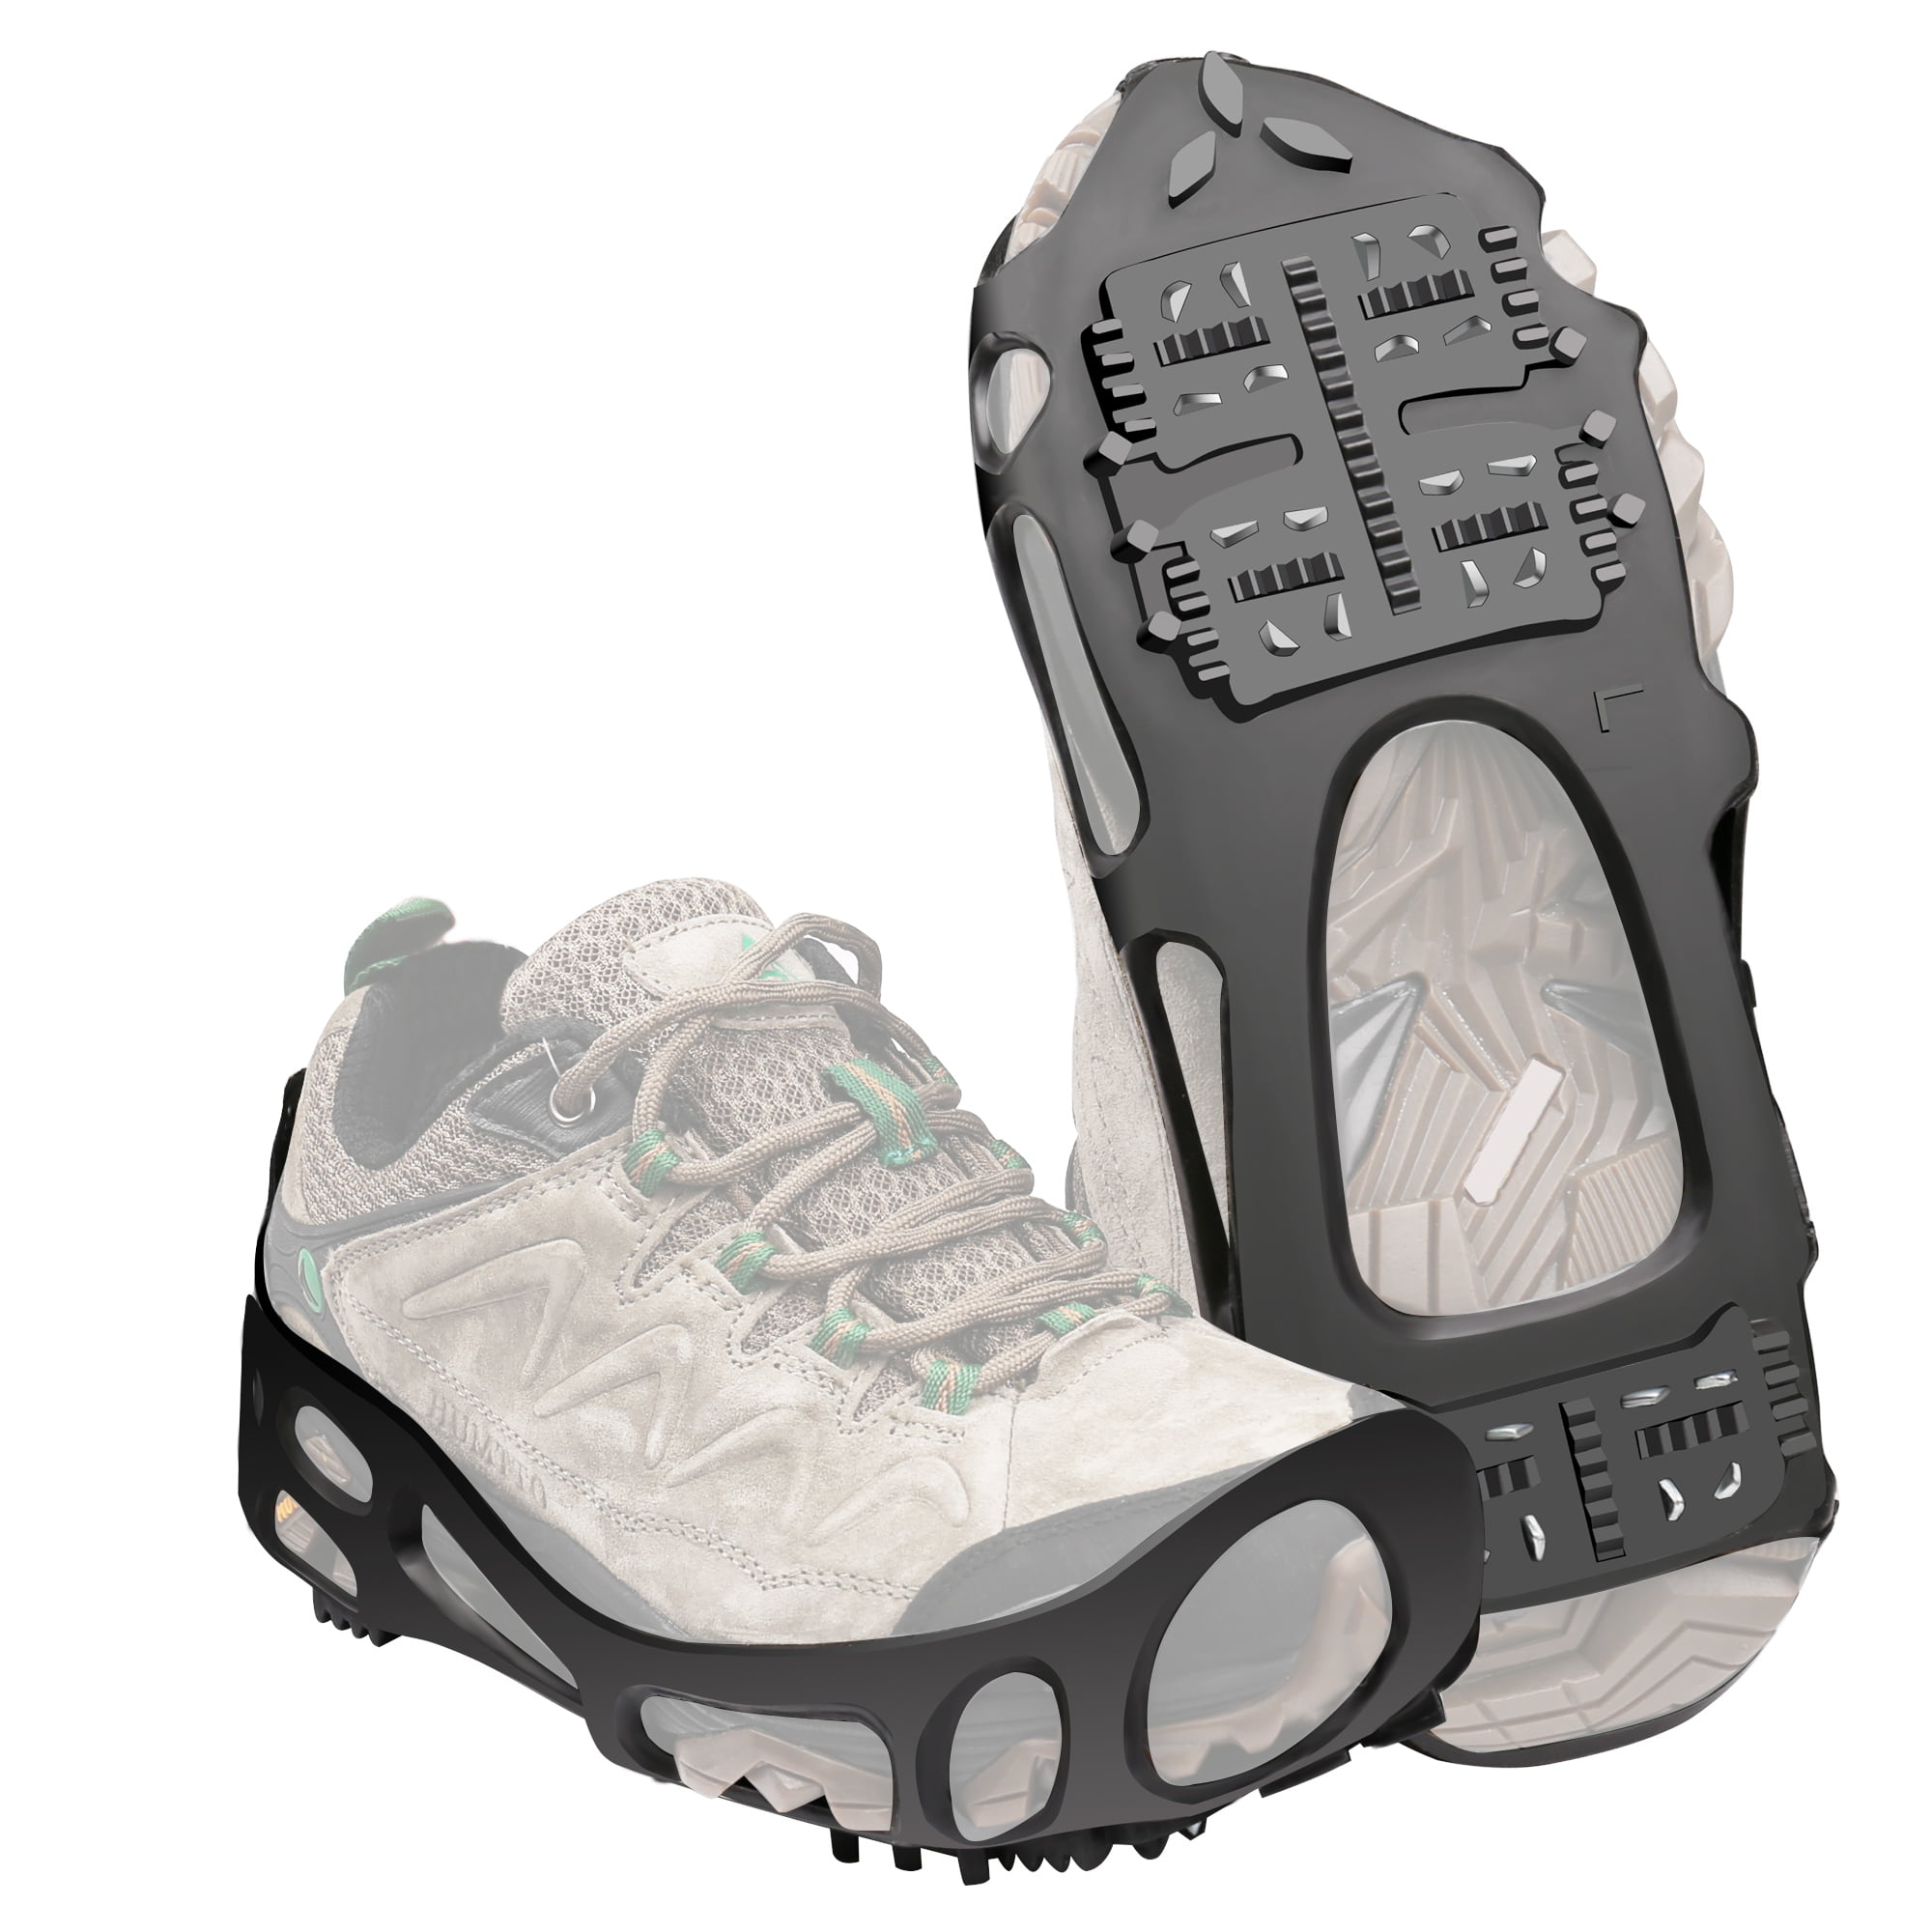 1 Pair of 24 Teeth Ice Snow Grips Grippers Anti-Slip Lite Duty Serious Walk Traction Cleats with 2 Removable Straps